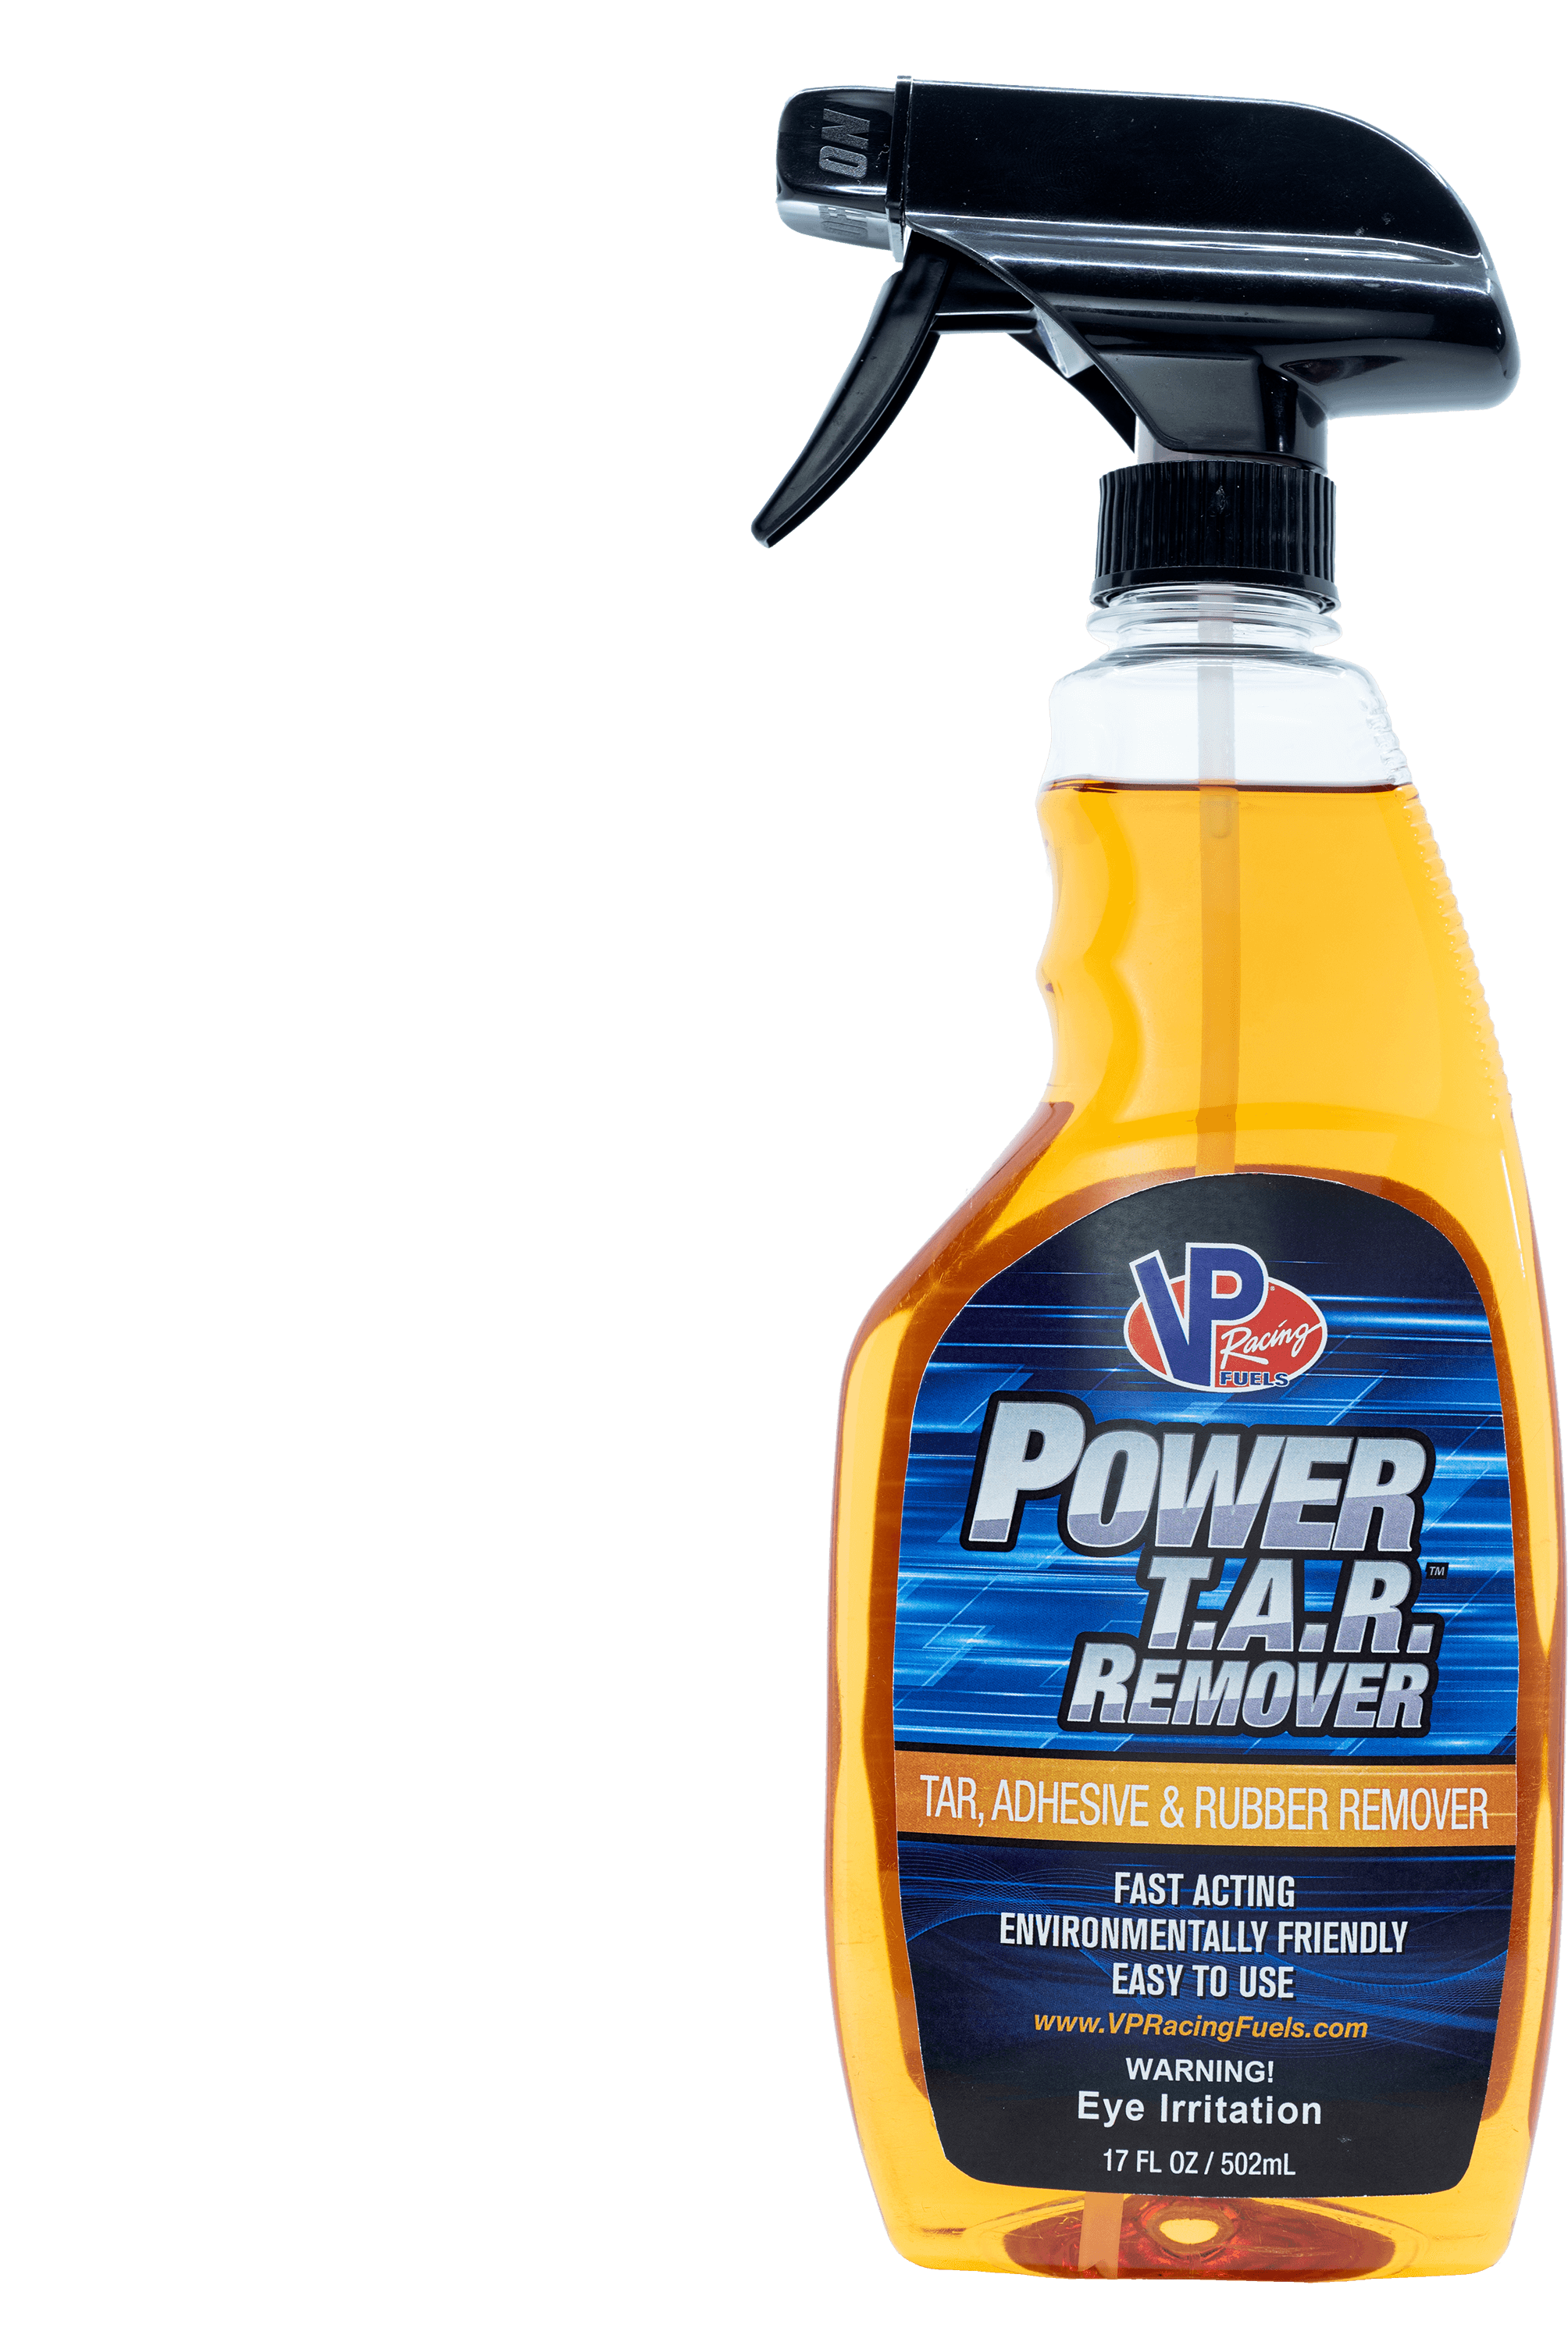 The best tar remover for your bodywork